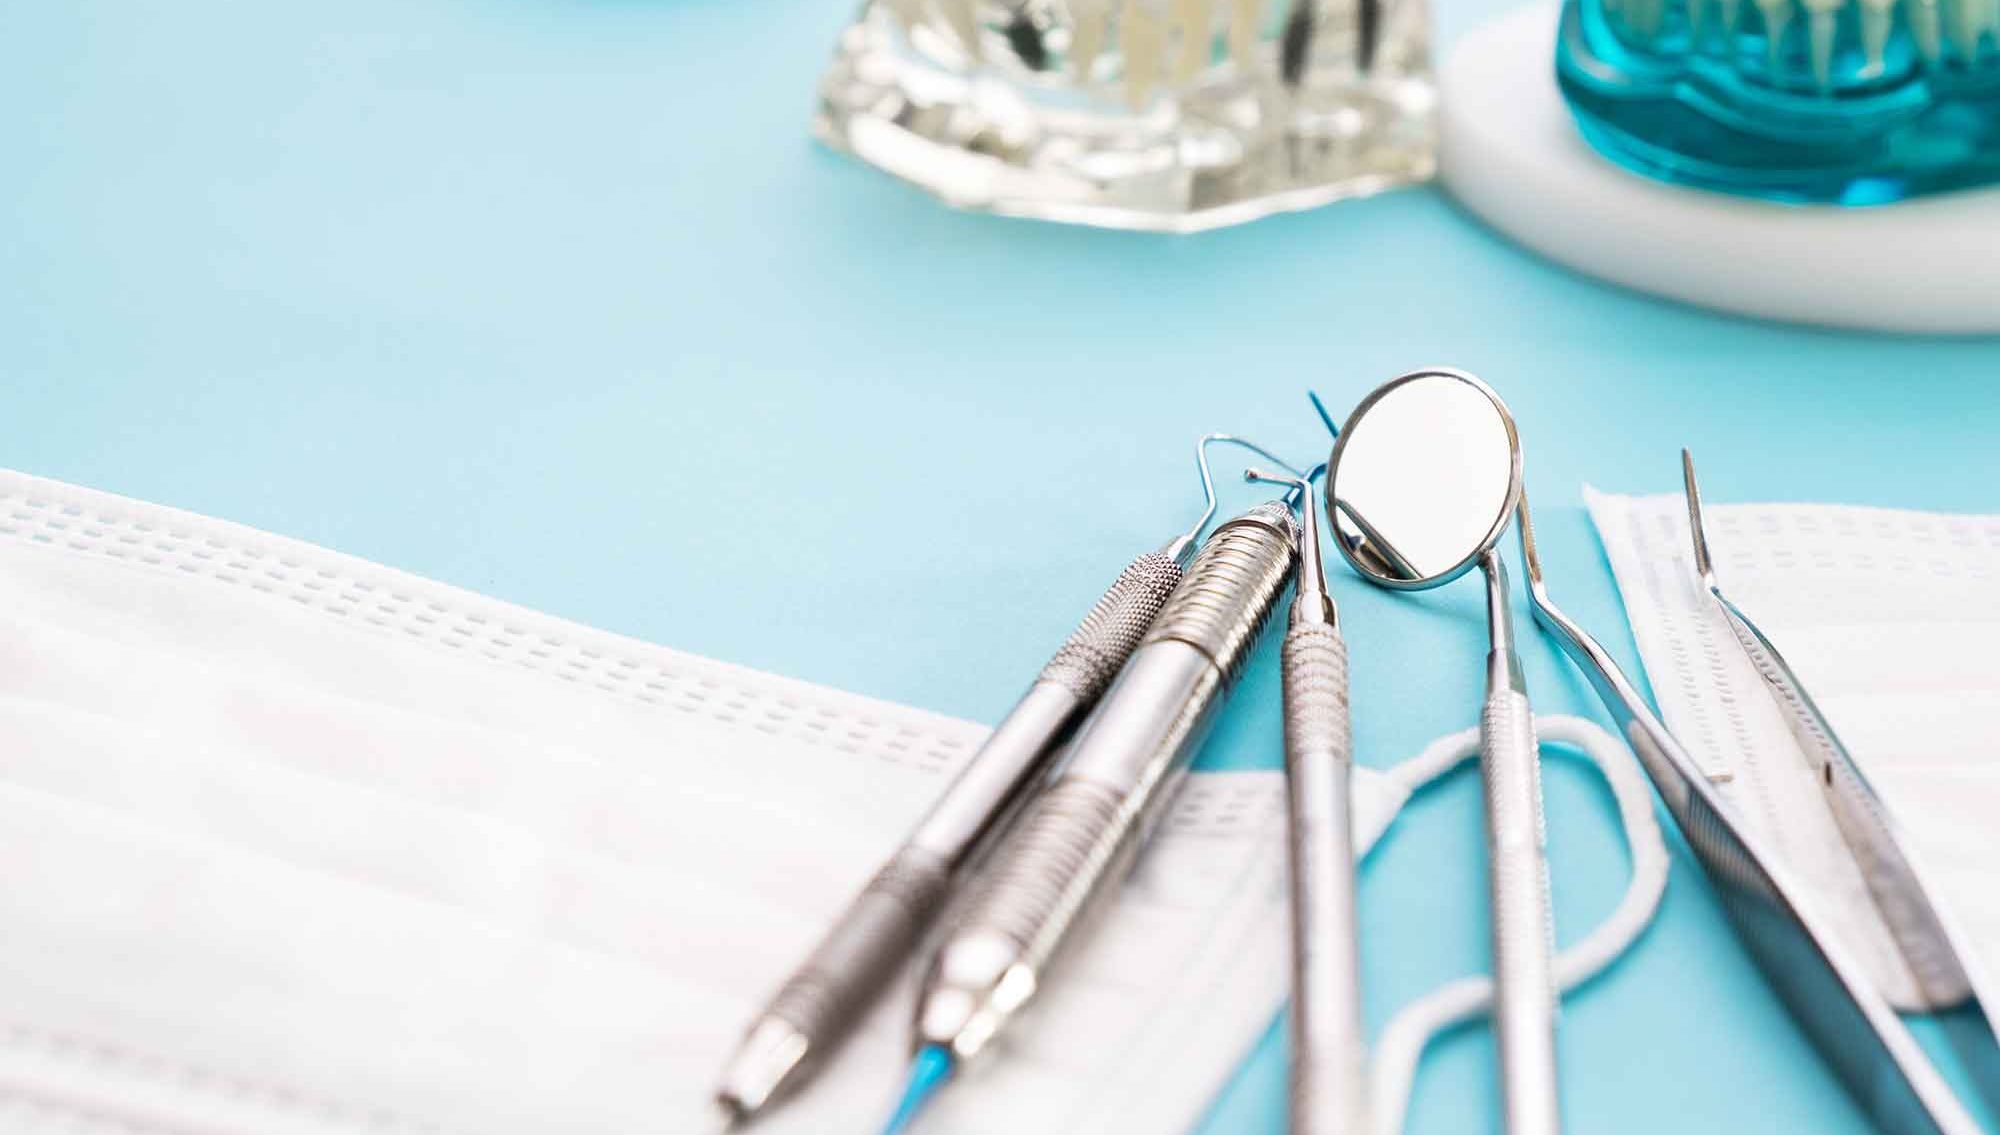 Should dentists be considered an entrepreneur or an artisan?